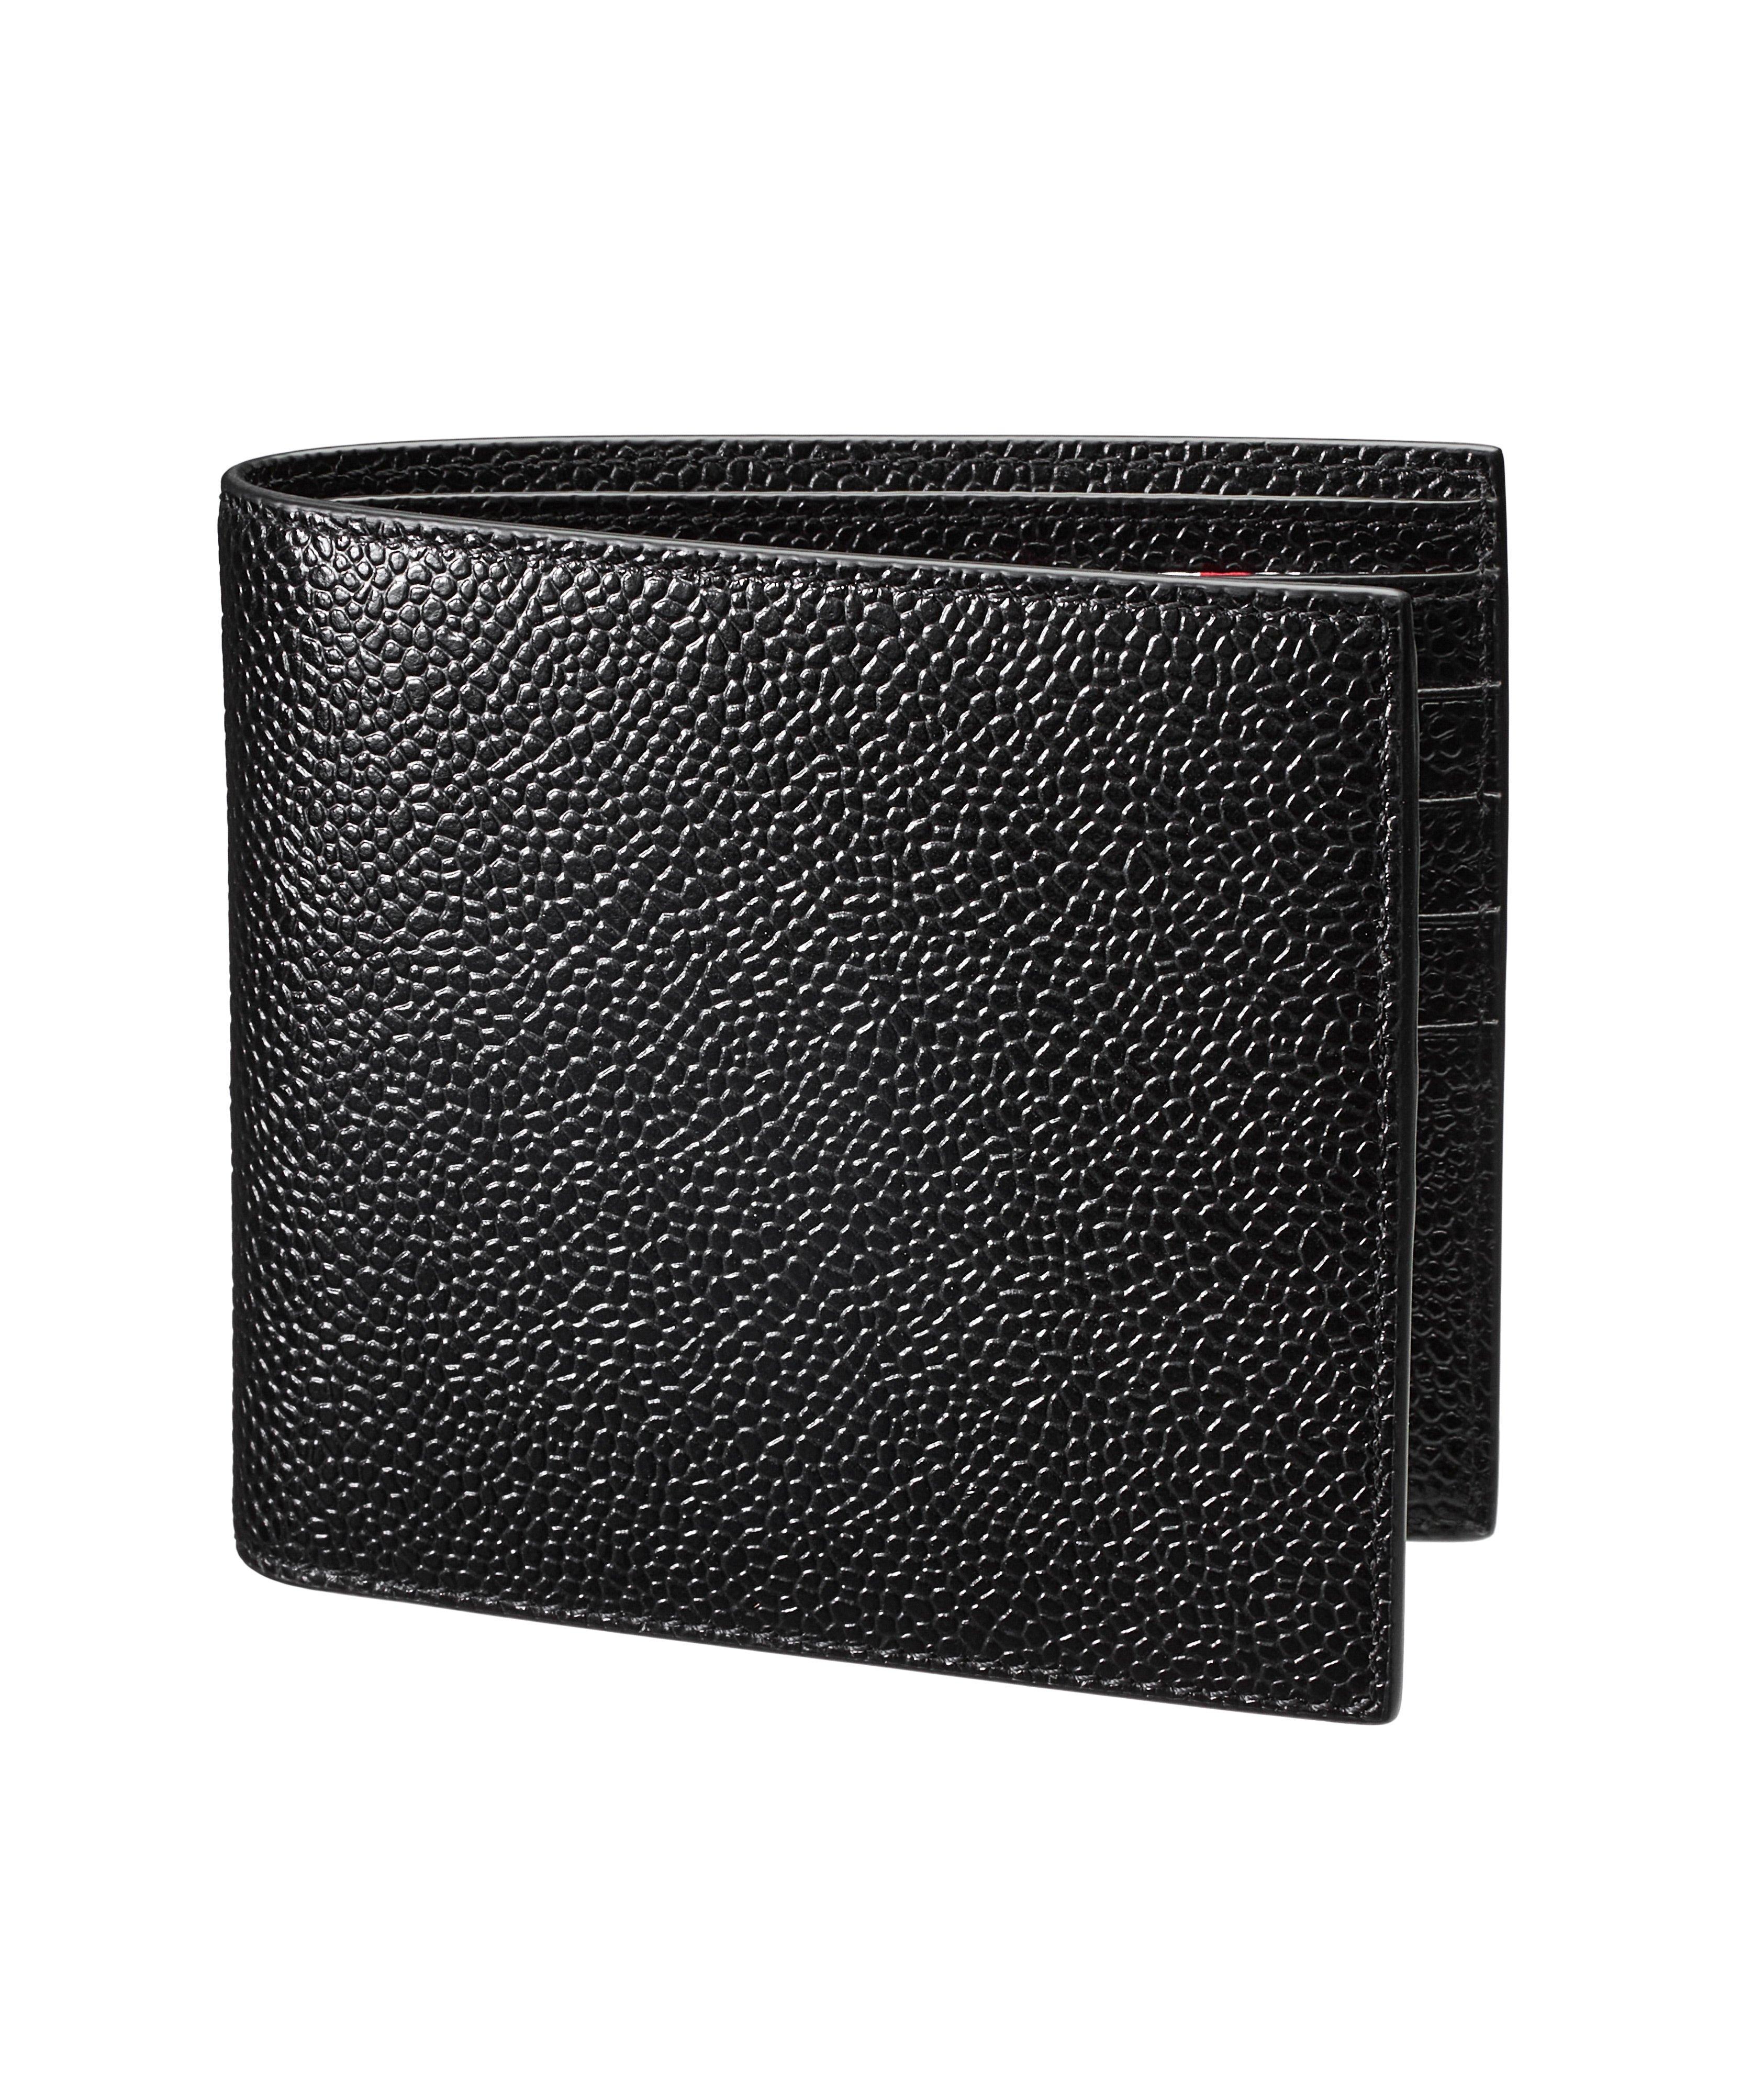 Pebbled Grain Leather Bifold Wallet image 0